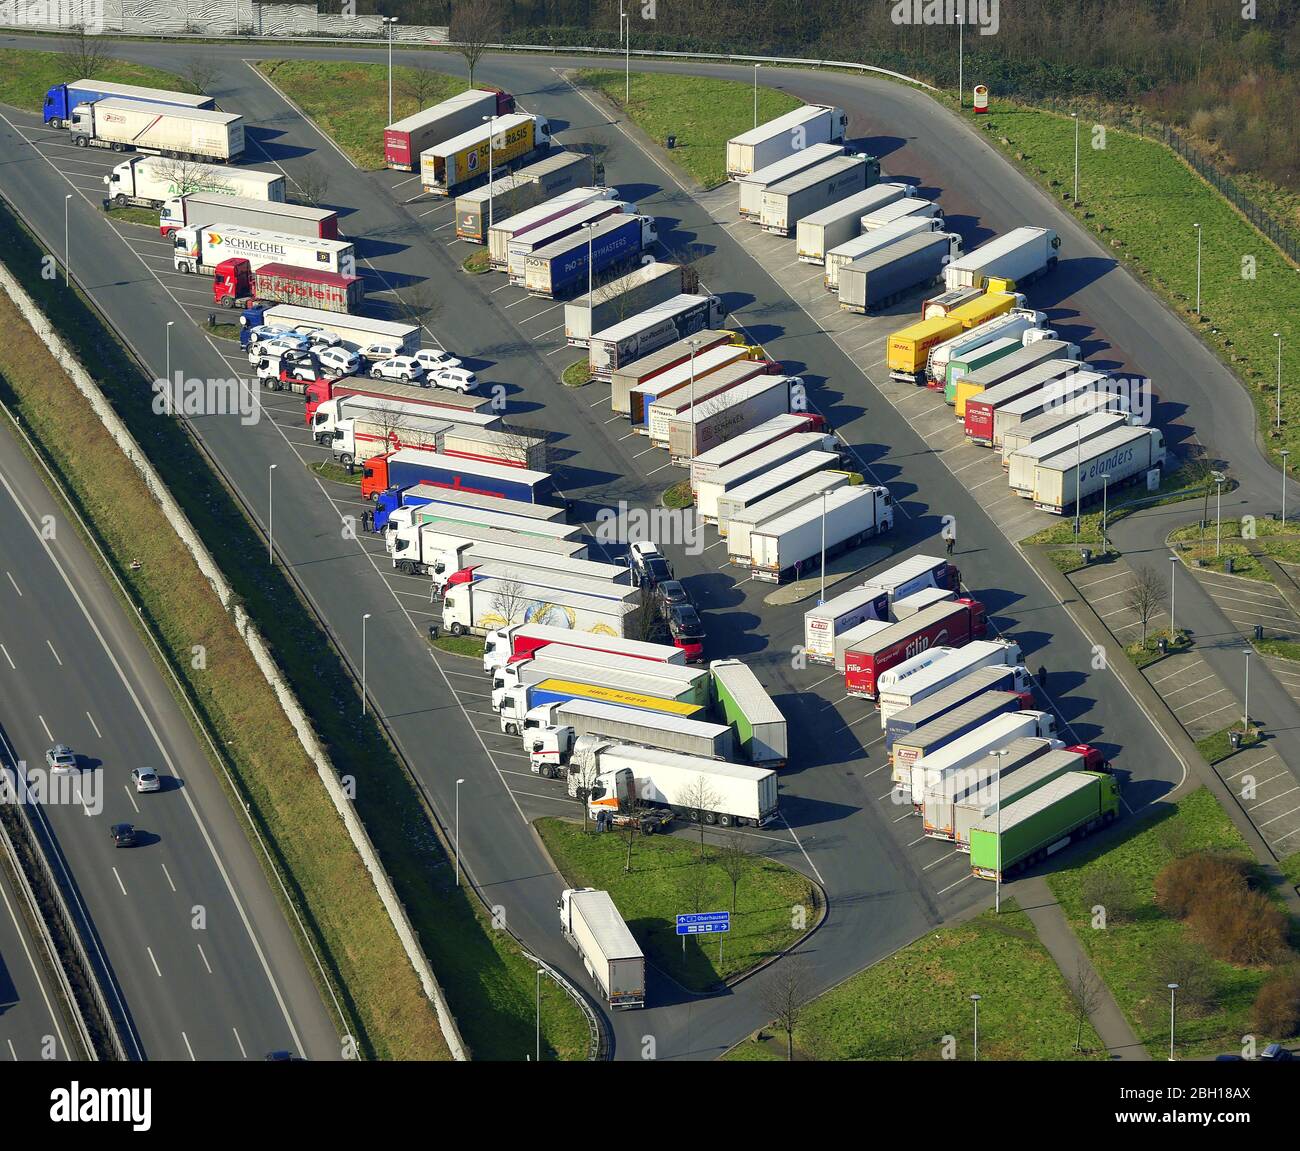 Lorries parking spaces at the highway rest stop and parking of the A2 Rasthof Resser Mark in Gelsenkirchen, 27.02.2016, aerial view, Germany, North Rhine-Westphalia, Ruhr Area, Gelsenkirchen Stock Photo